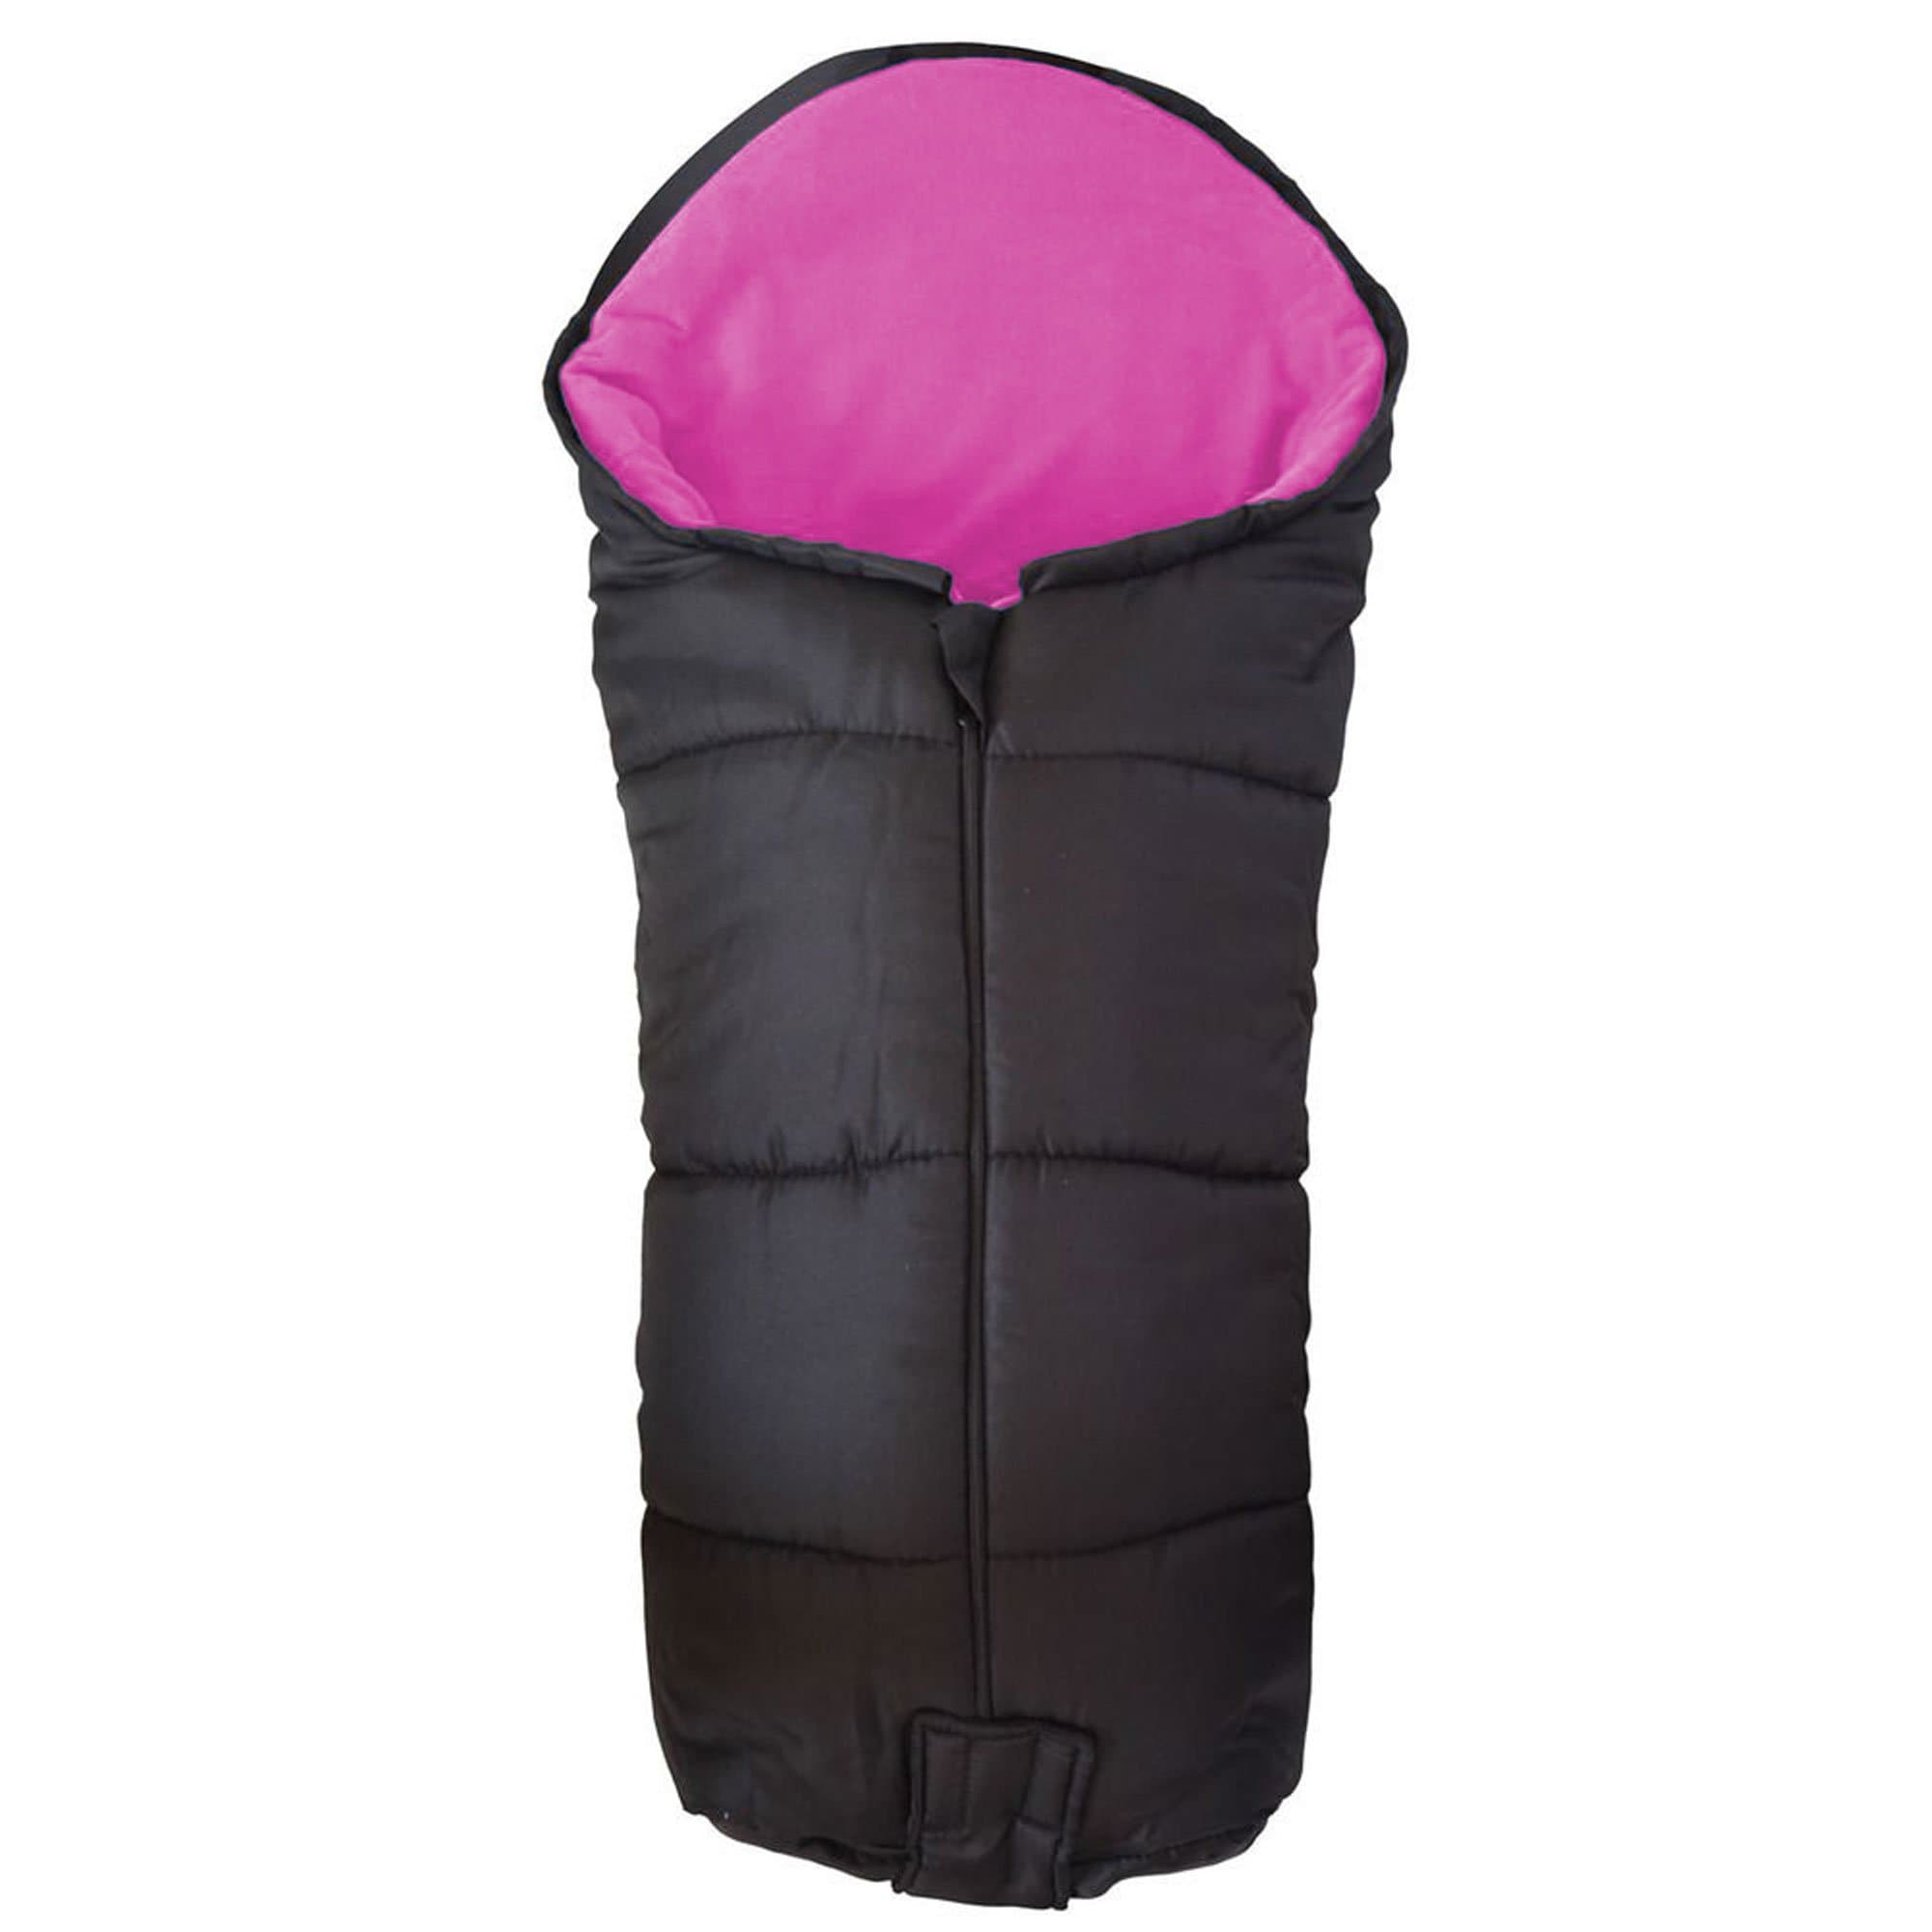 Deluxe Footmuff / Cosy Toes Compatible with Kiddicare - Pink / Fits All Models | For Your Little One